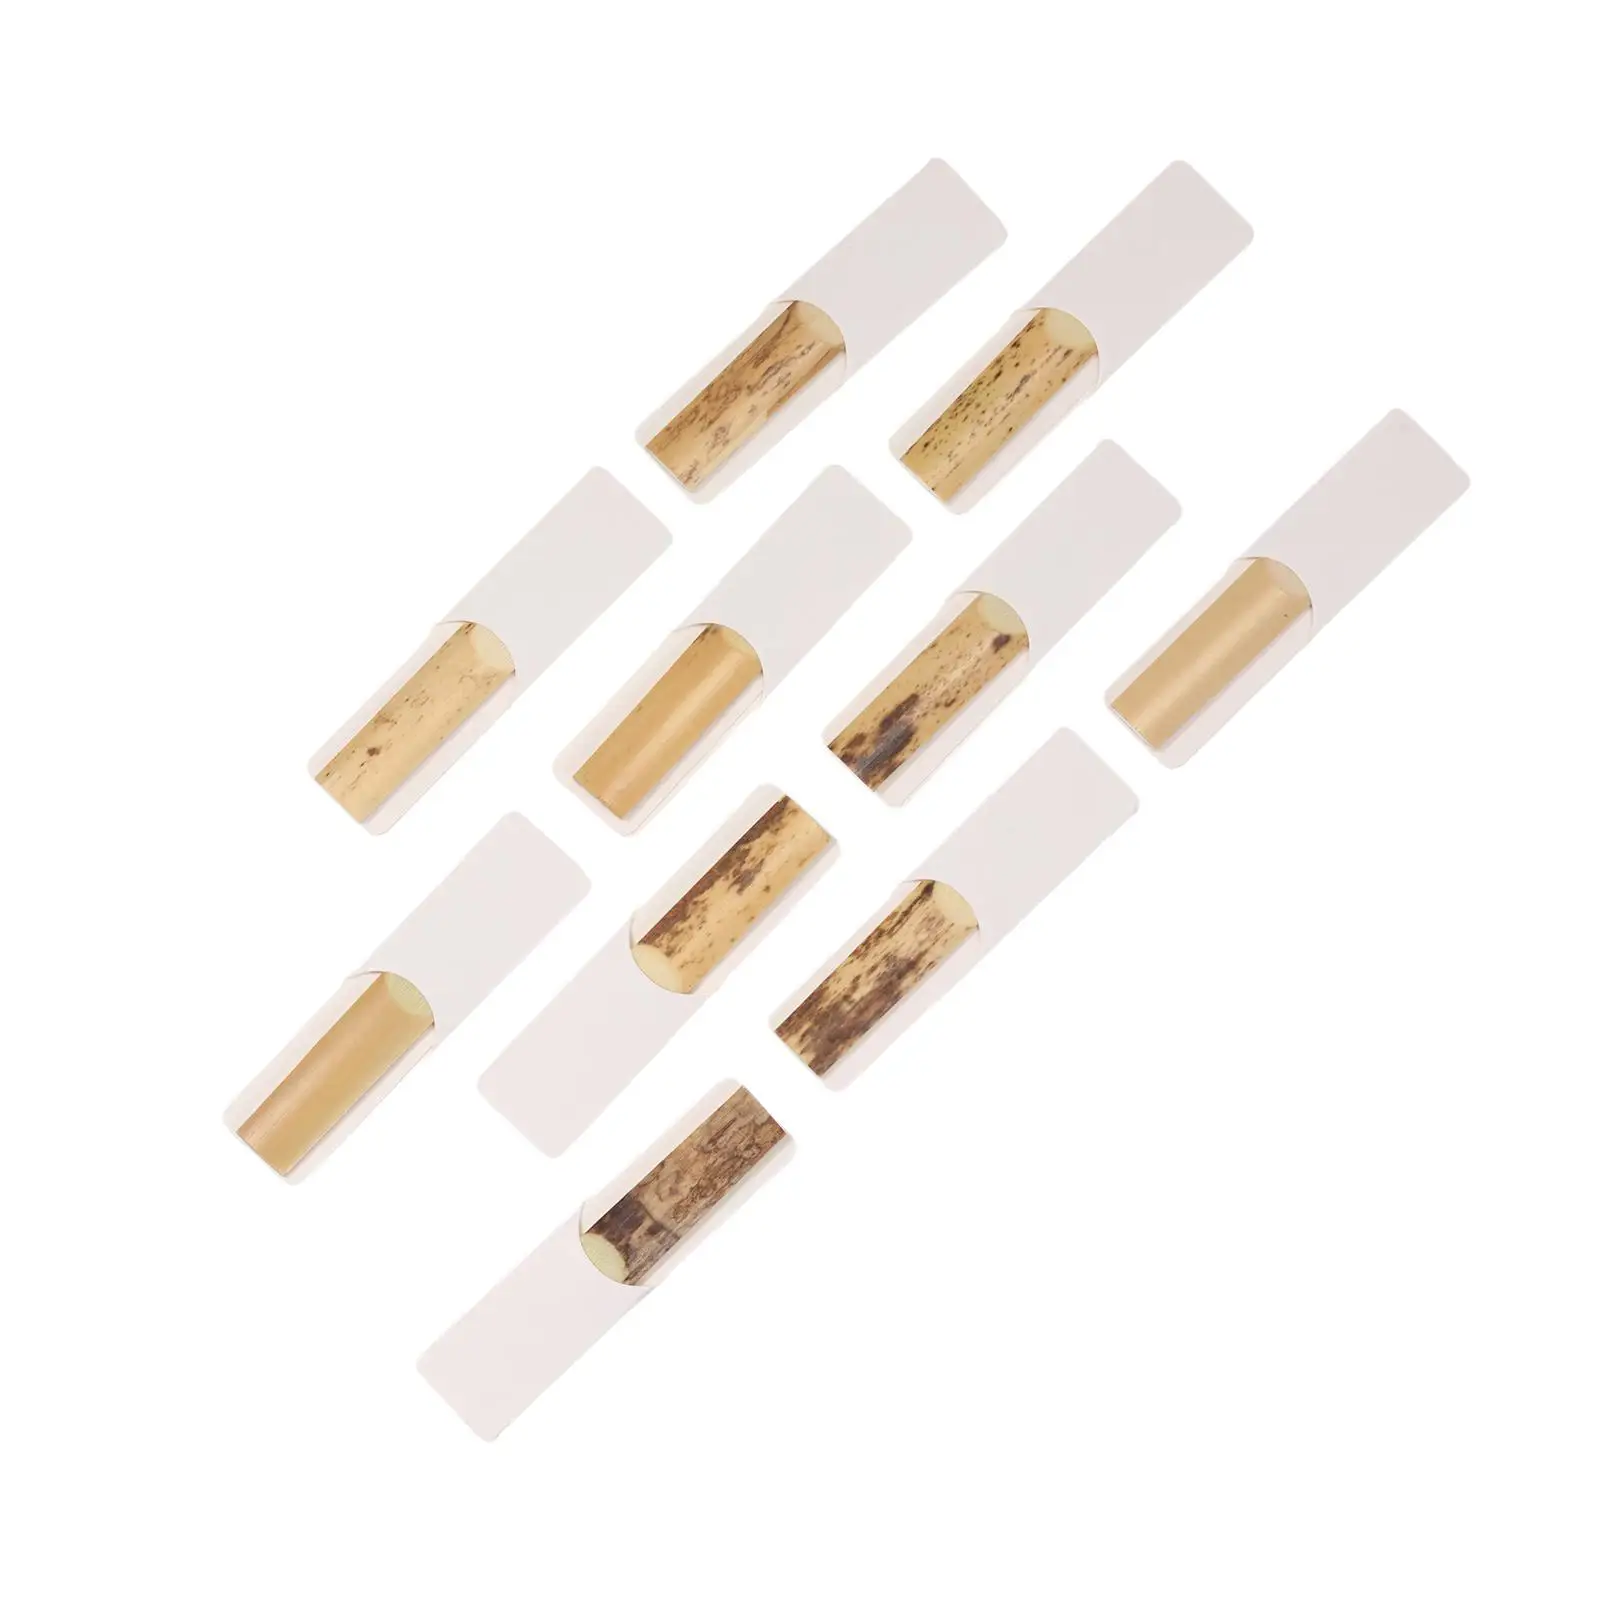 10x Clarinet Reeds Traditional BB Clarinet Reeds Strength 2.5 Durable Parts Clear Sound for Woodwind Instrument Beginner